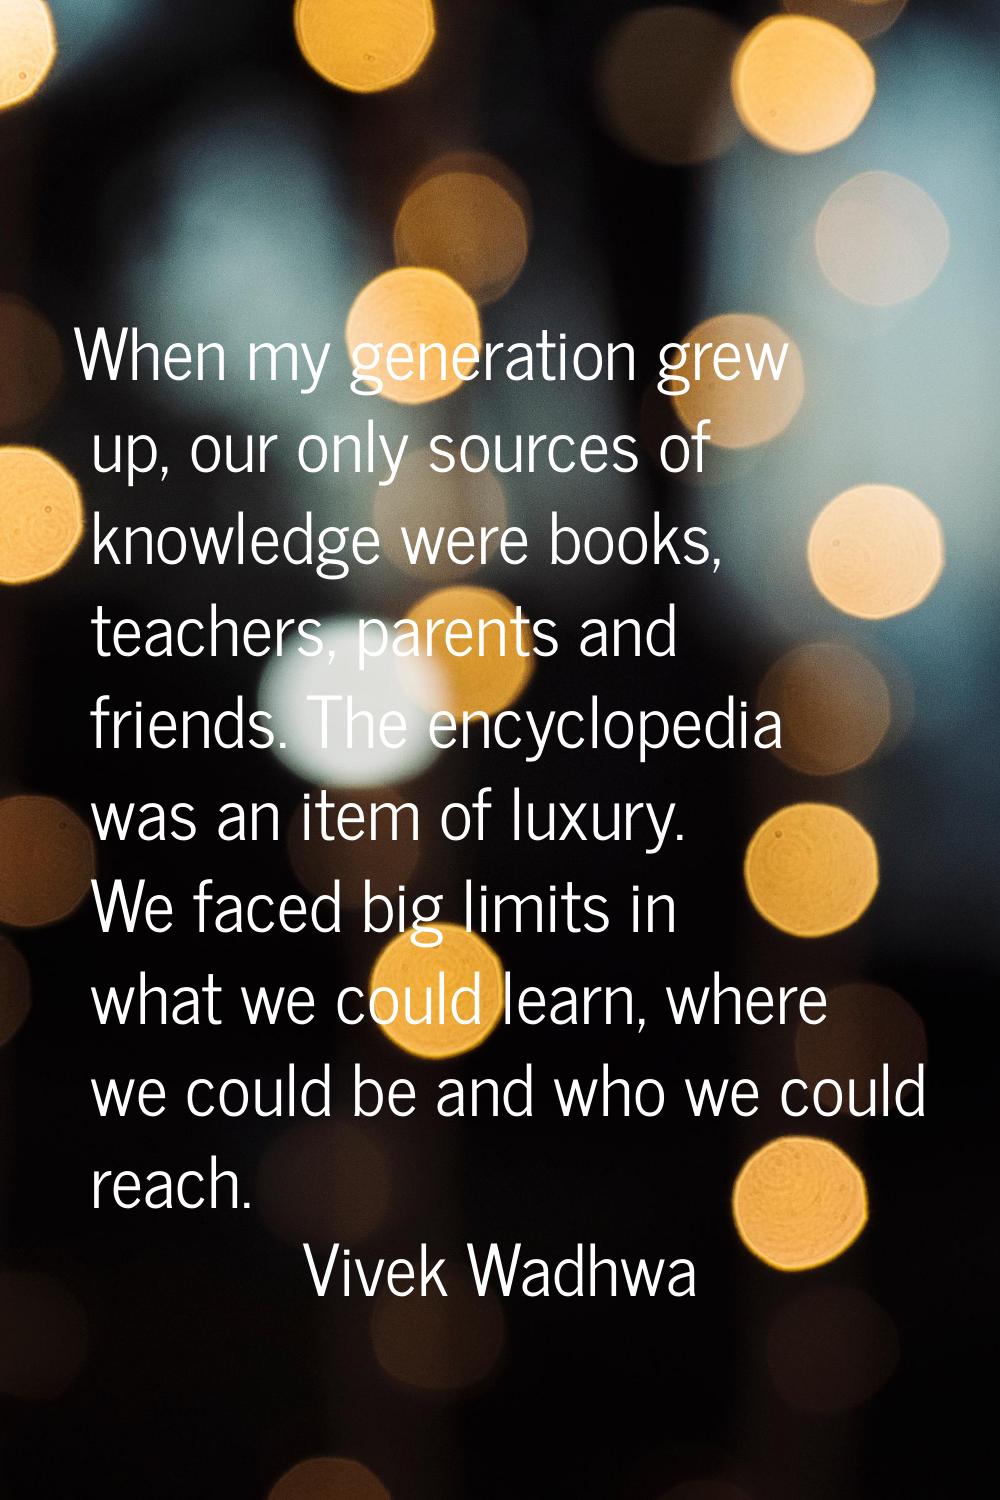 When my generation grew up, our only sources of knowledge were books, teachers, parents and friends